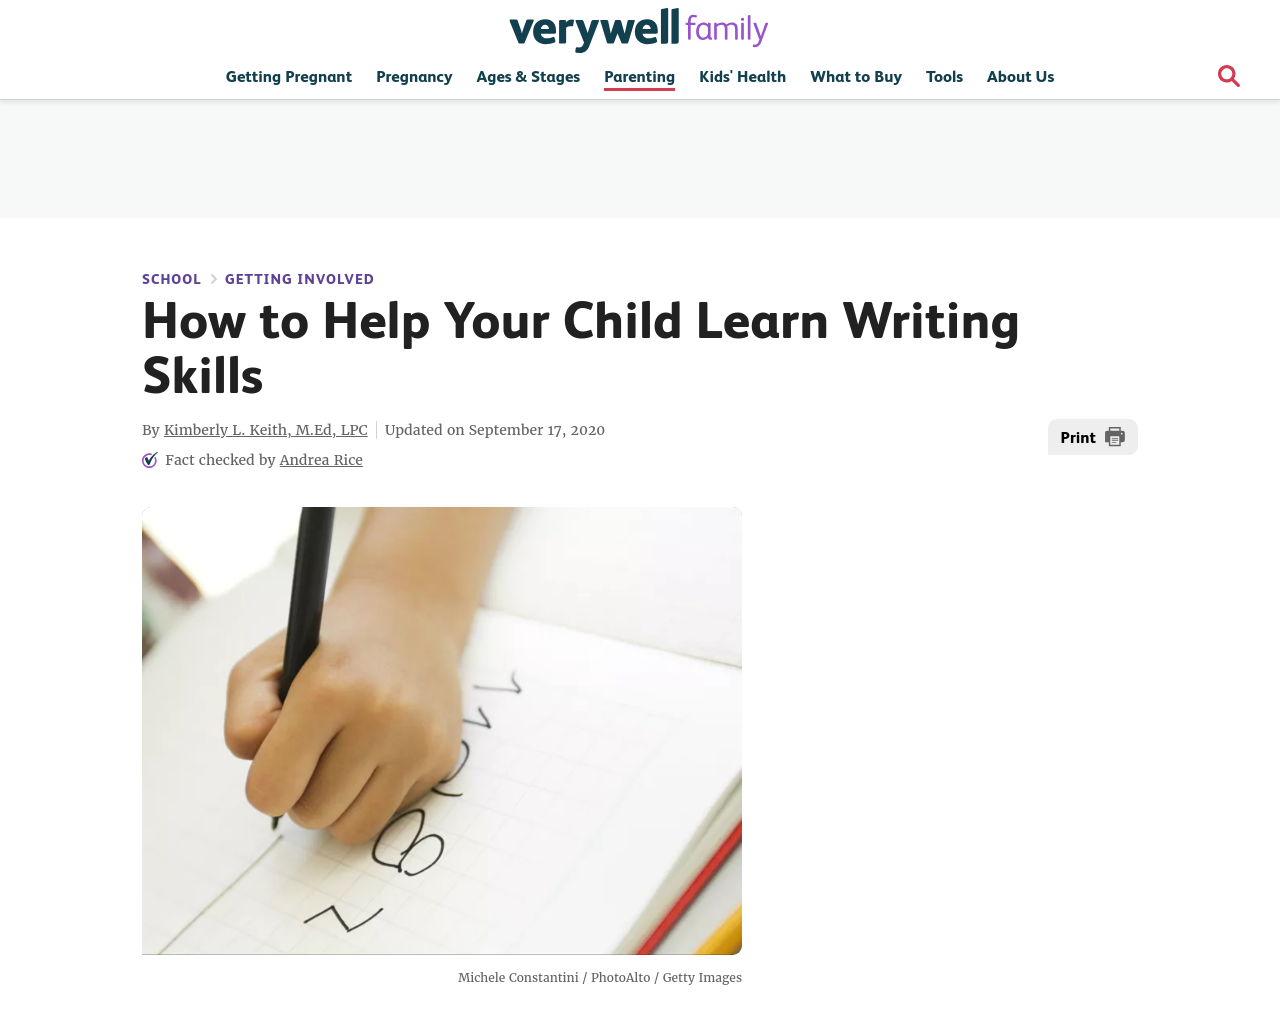 Helping your child with writing